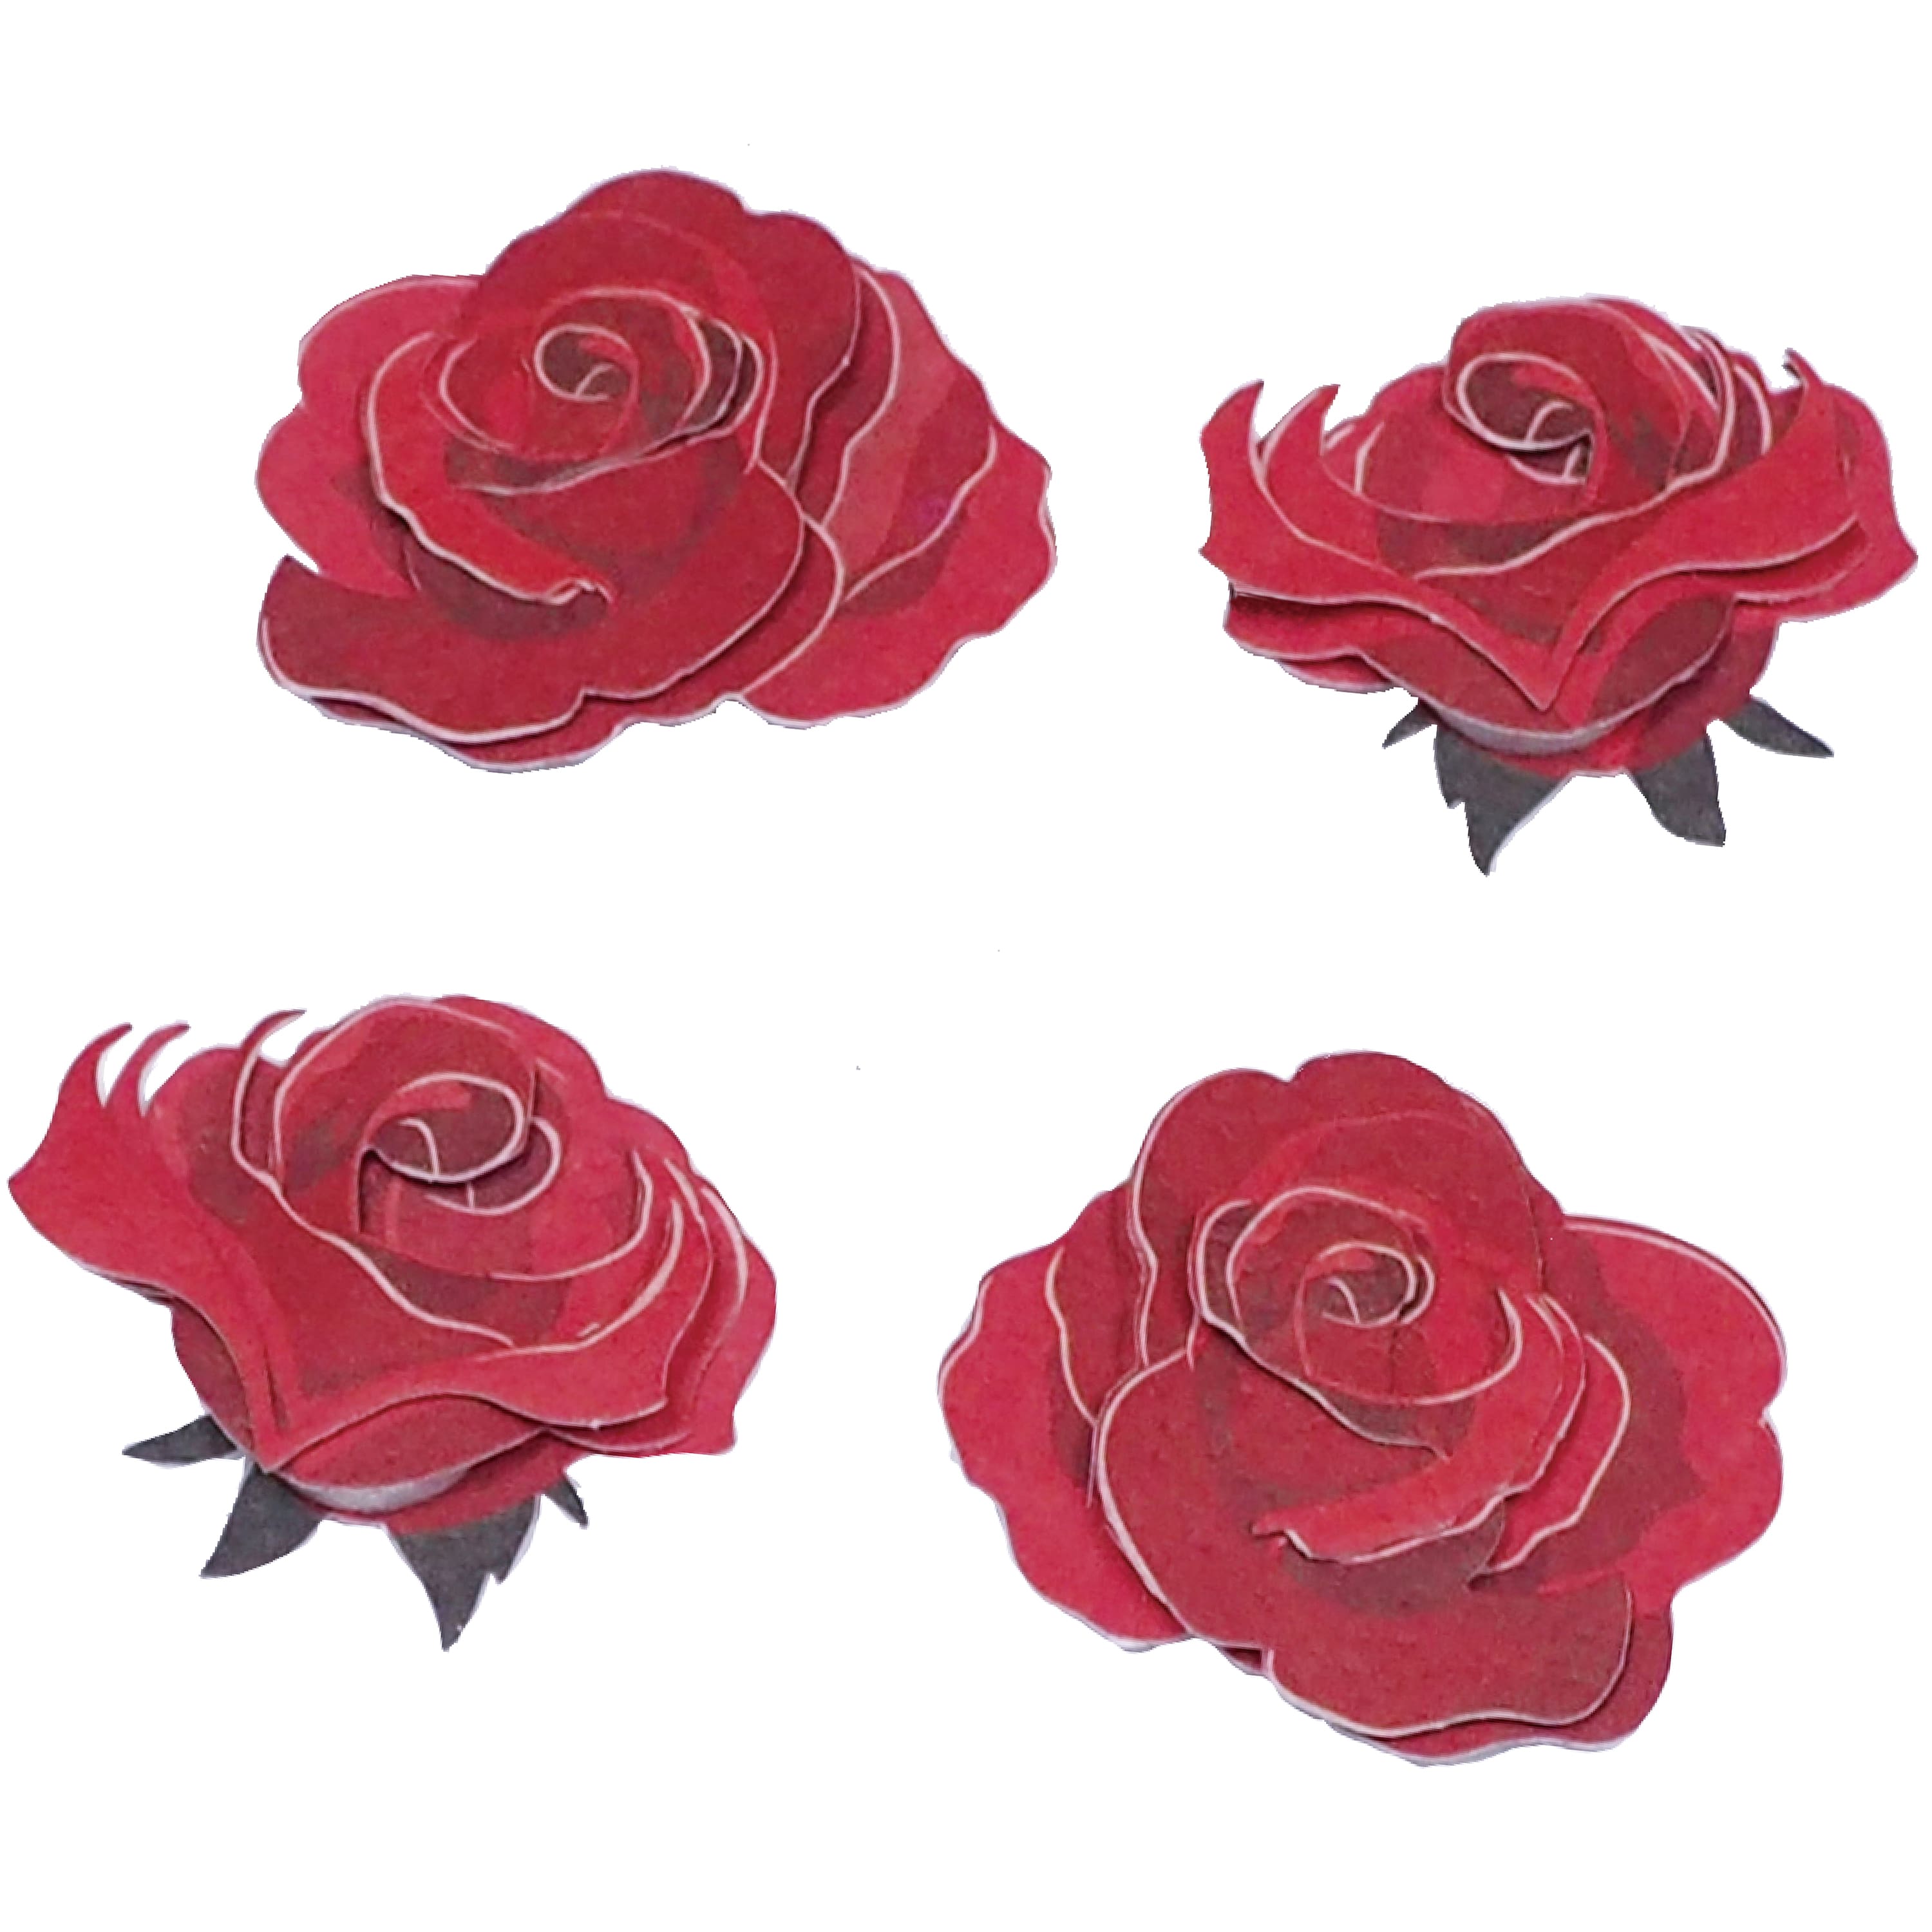  30 Pcs Stick Flat Back Roses Floral Stickers Adhesive